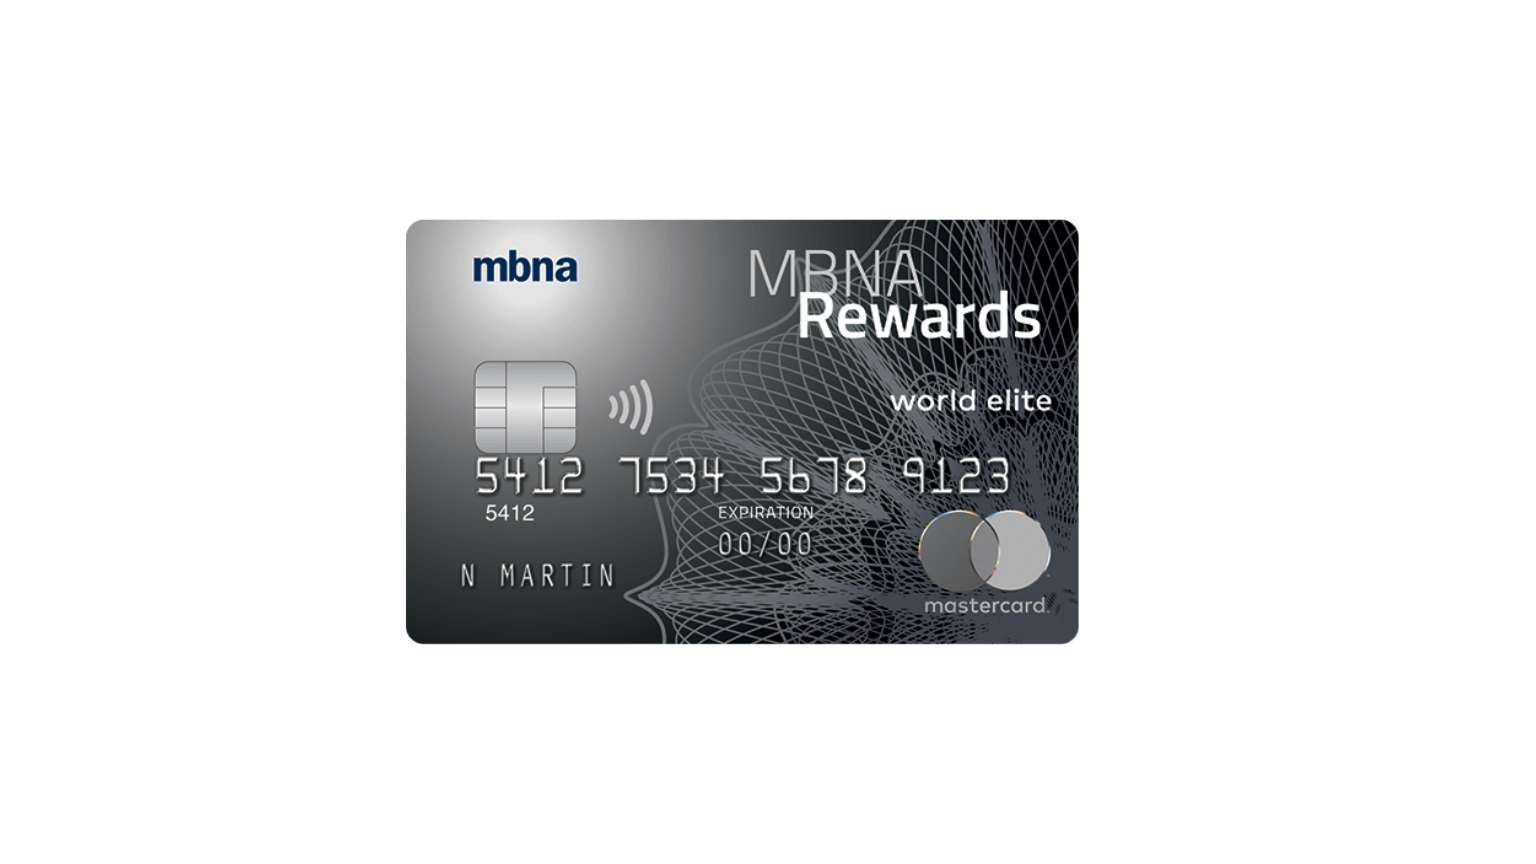 MBNA Rewards Platinum Plus Mastercard - Learn How to Apply Online